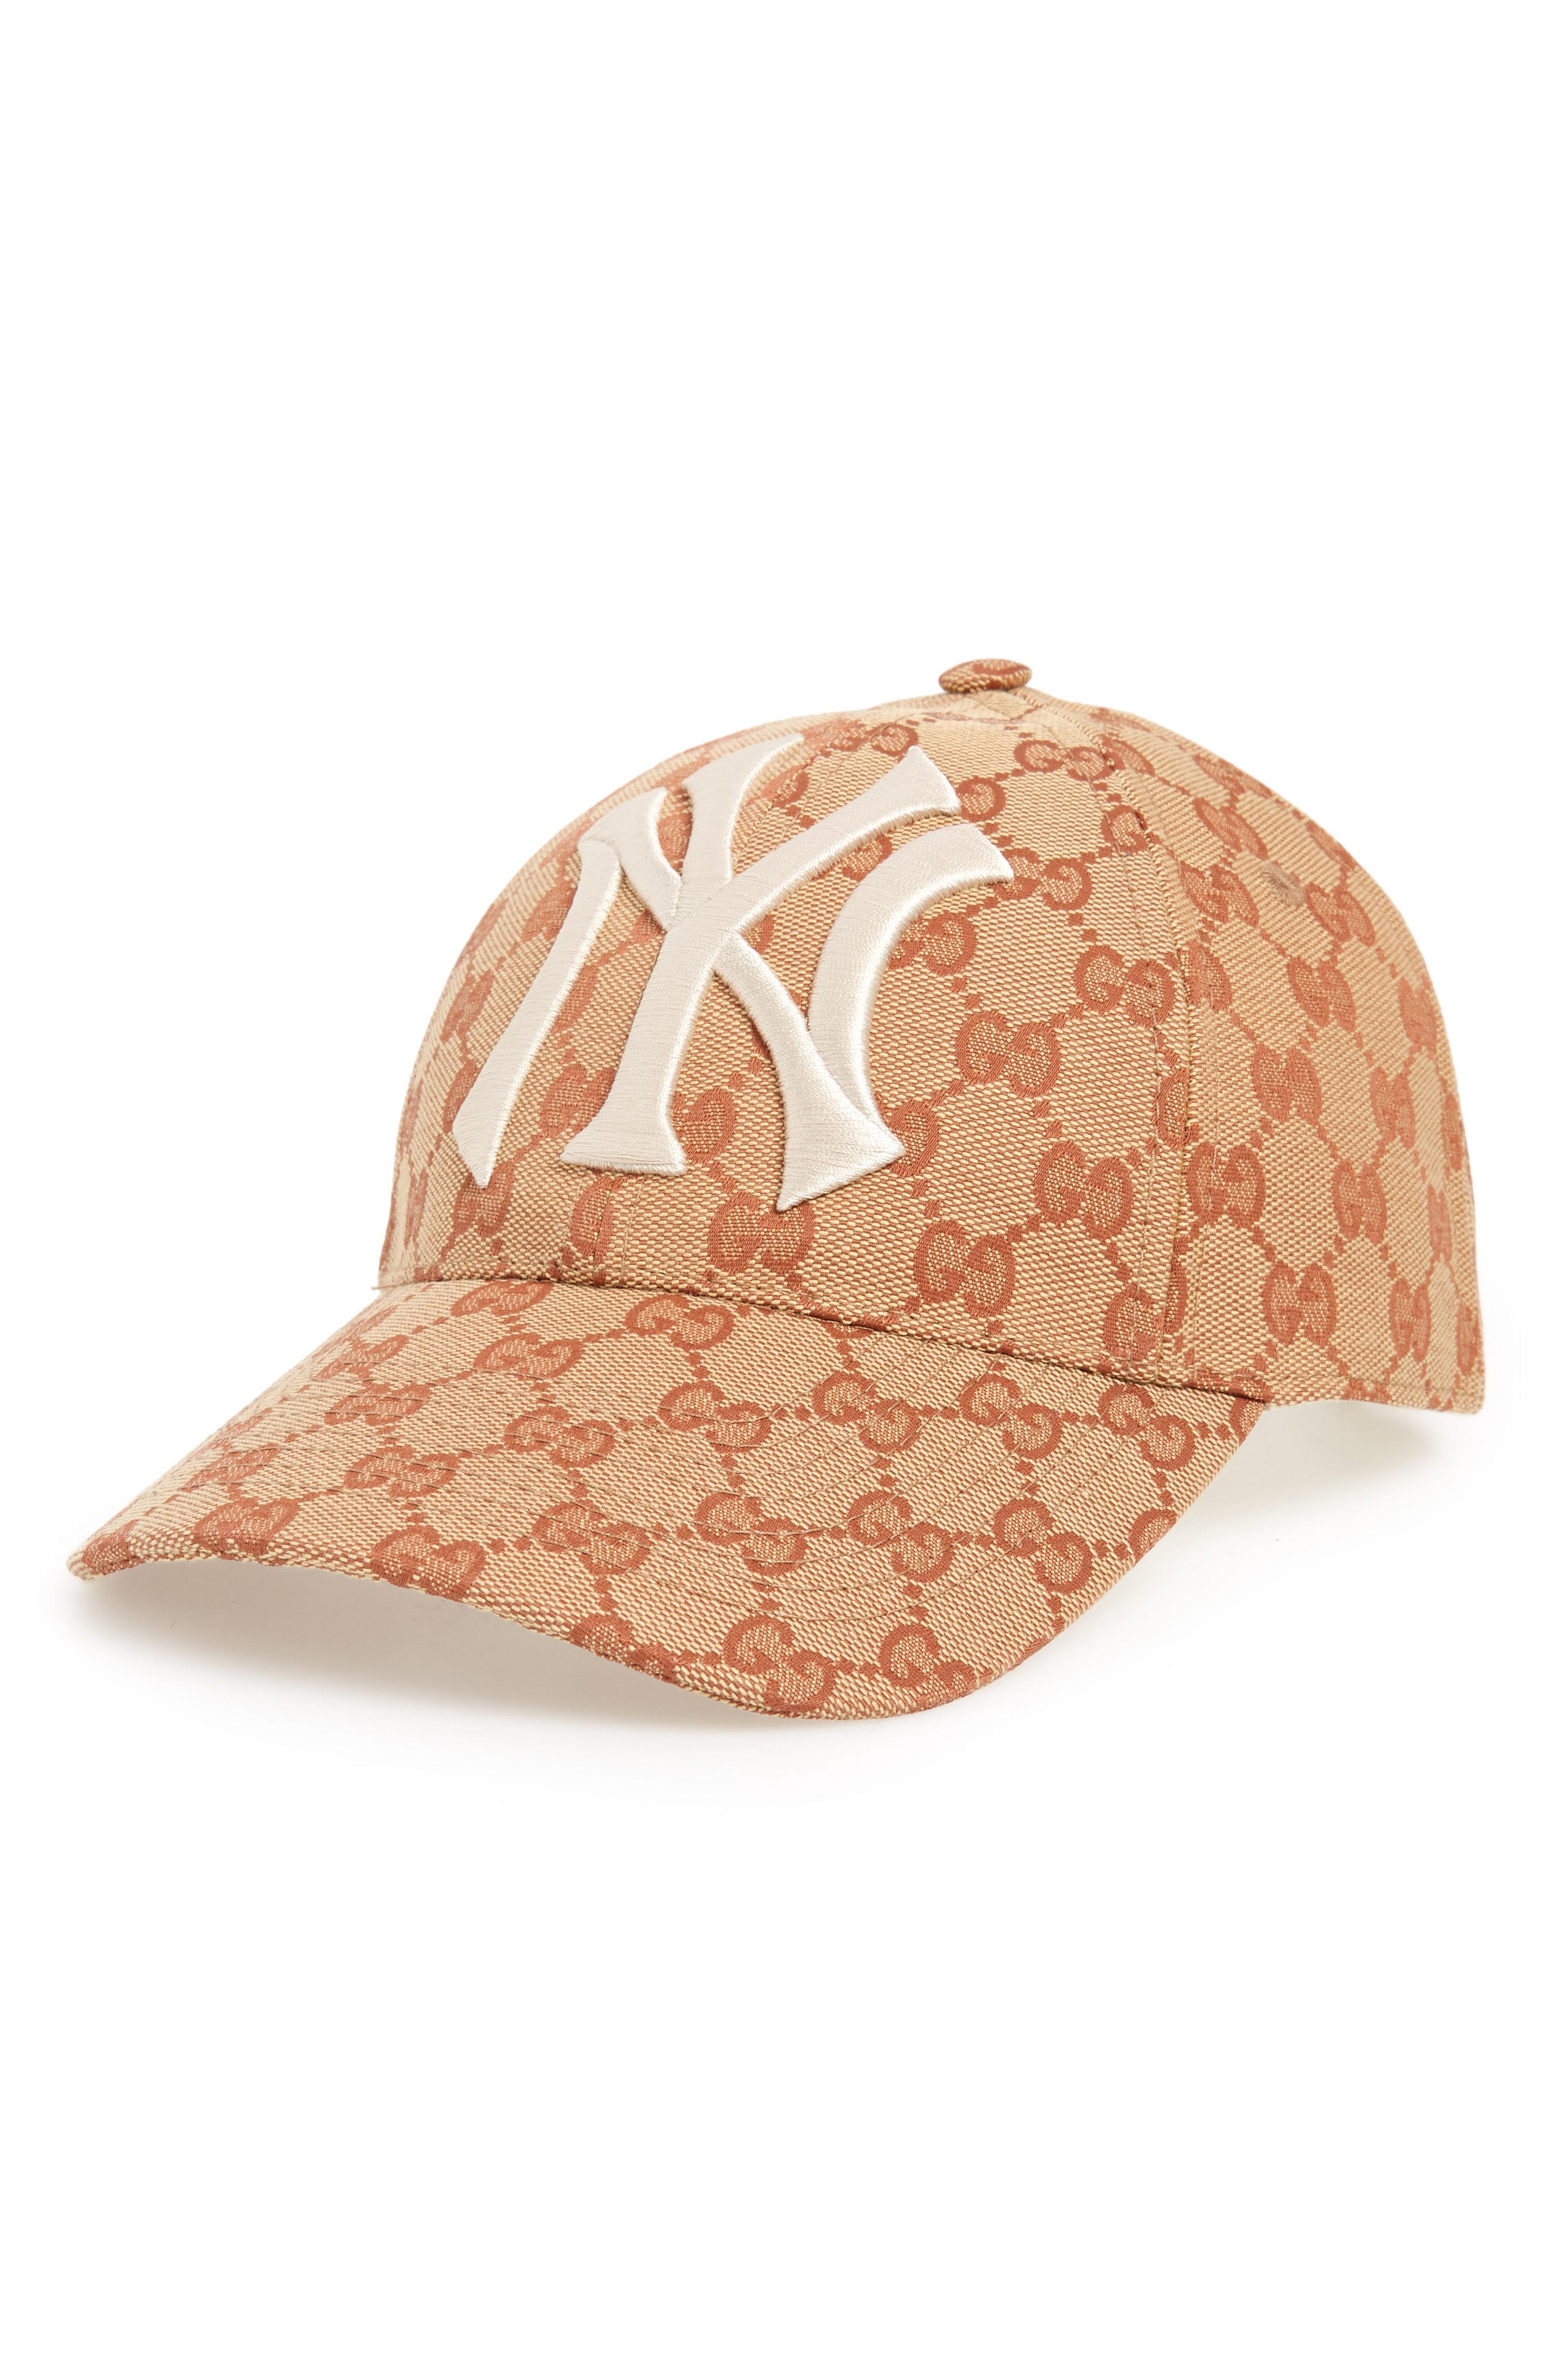 ny yankees gucci hat, OFF 72%,www 